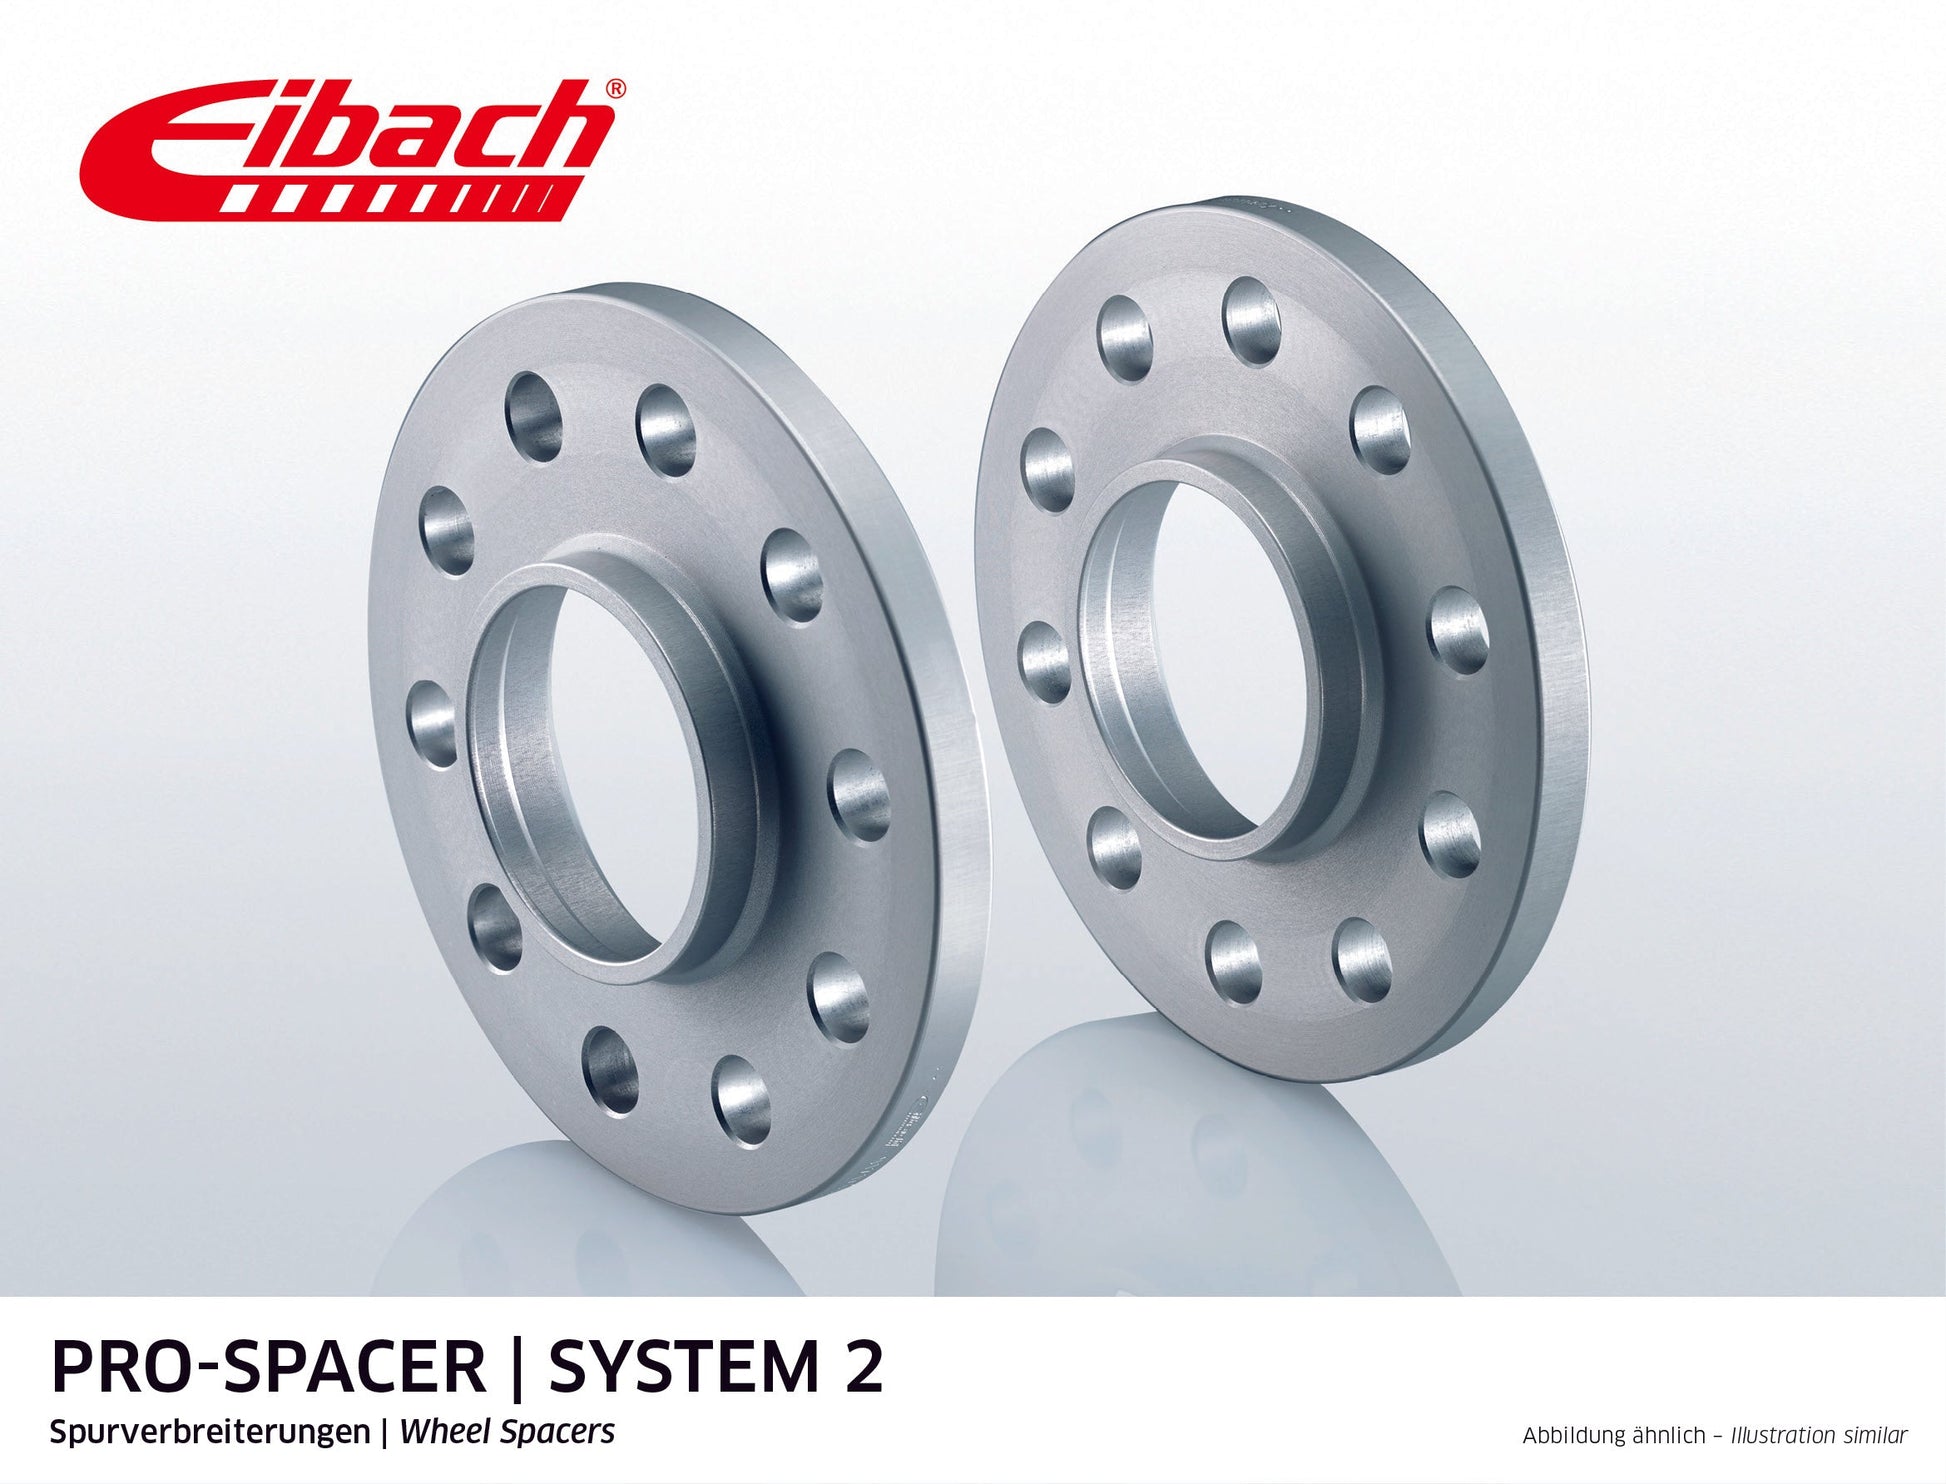 Eibach Pro-Spacer Kit (Pair Of Spacers) 15mm Per Spacer (System 2) S90-2-15-035 (Silver) at £118.84